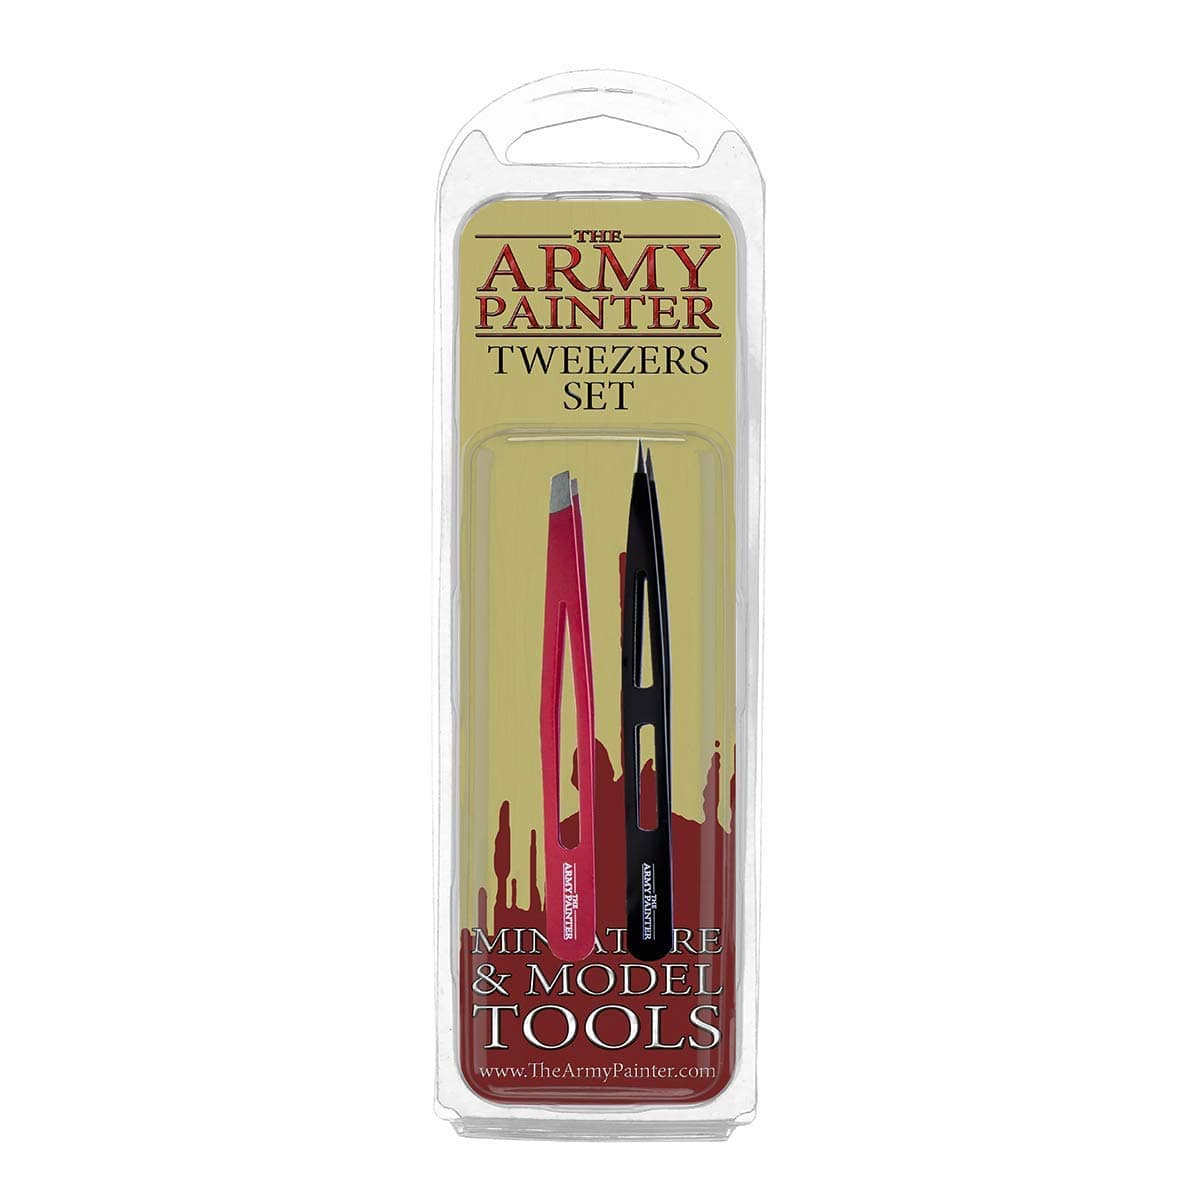 The Army Painter Tools: Tweezers Set - Lost City Toys